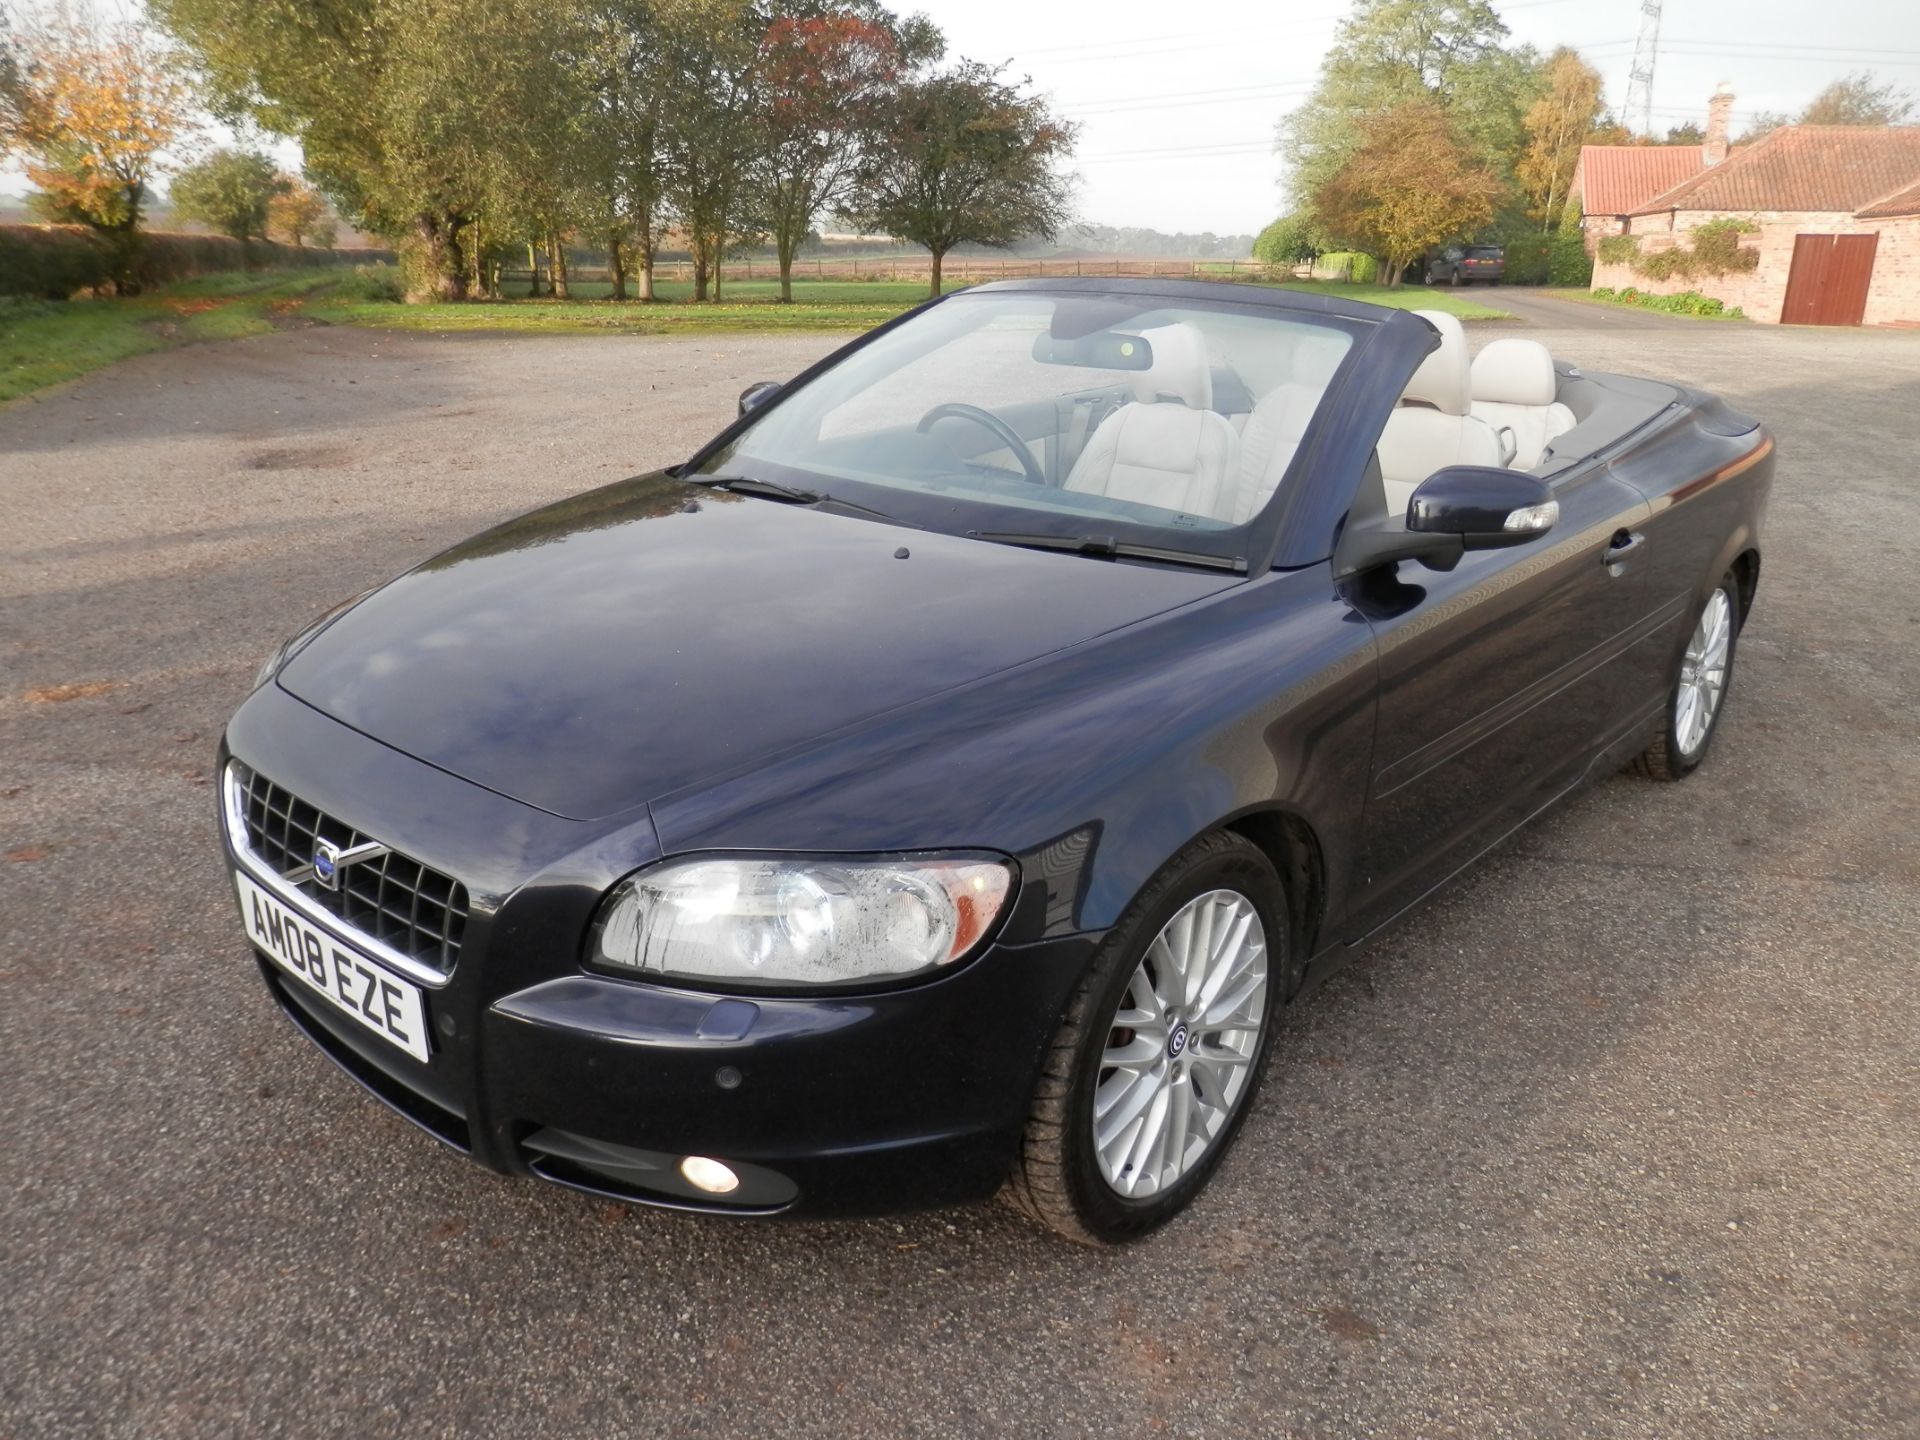 2008/08 VOLVO C70 SE LUX D5, DIESEL AUTO,CONVERTIBLE, MOT MAY 2017, ONLY 102K MILES, 180 BHP. - Image 7 of 57